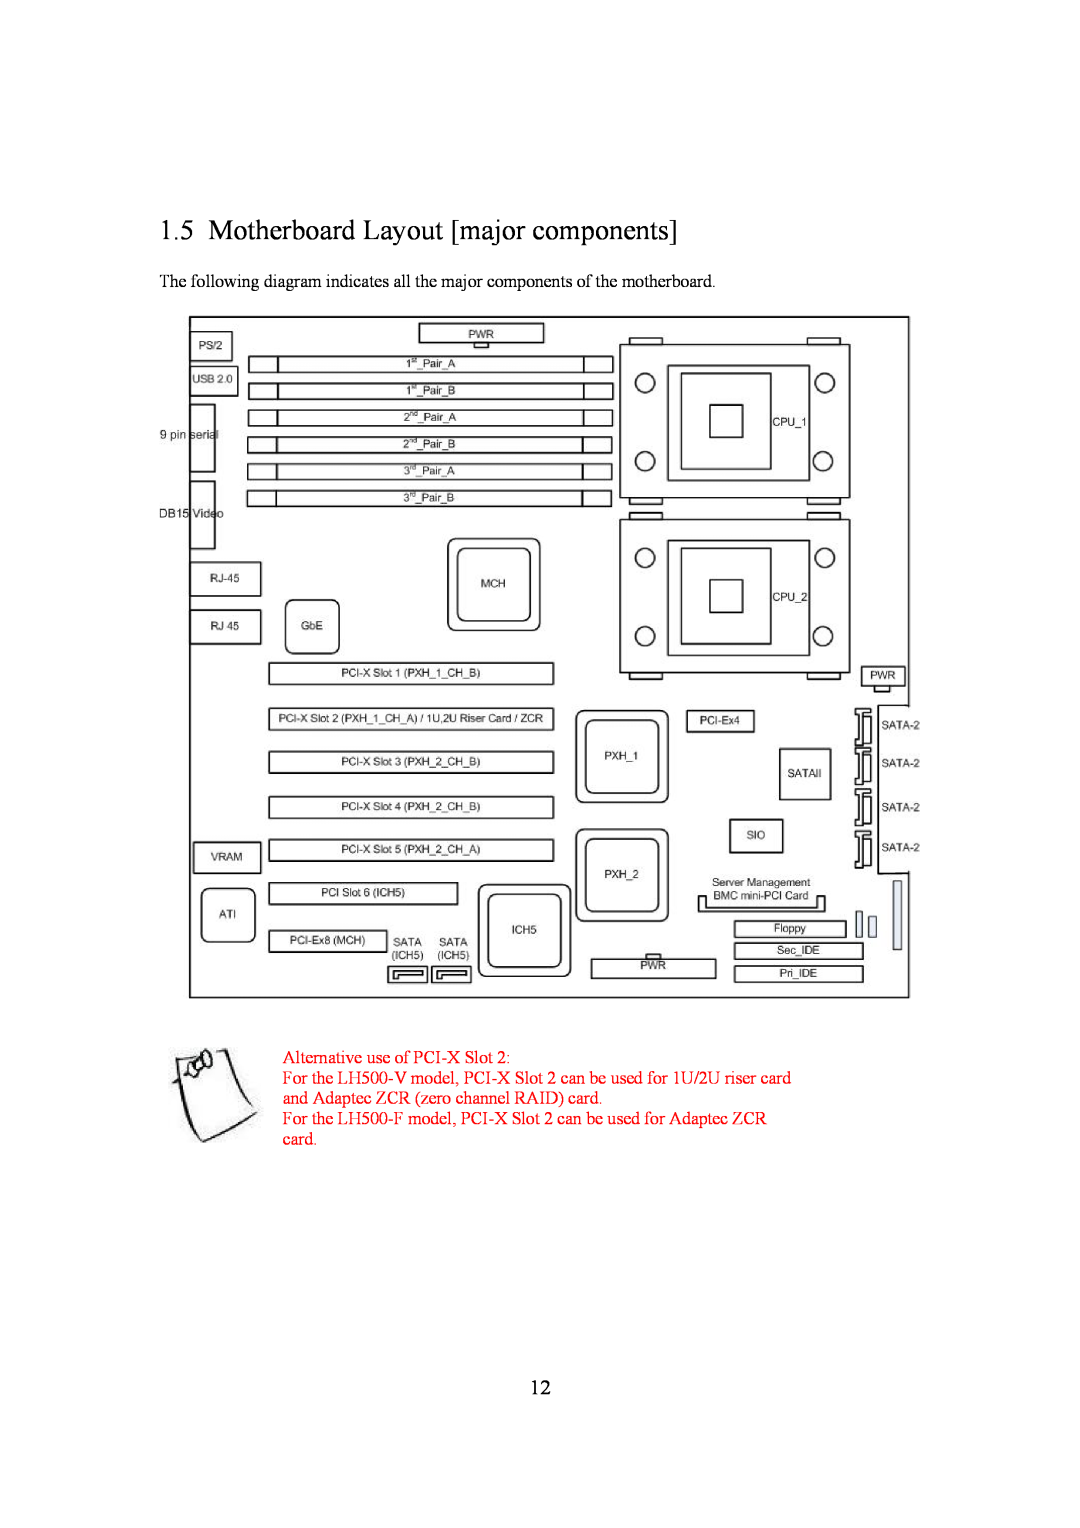 Intel LH500 user manual Motherboard Layout major components 